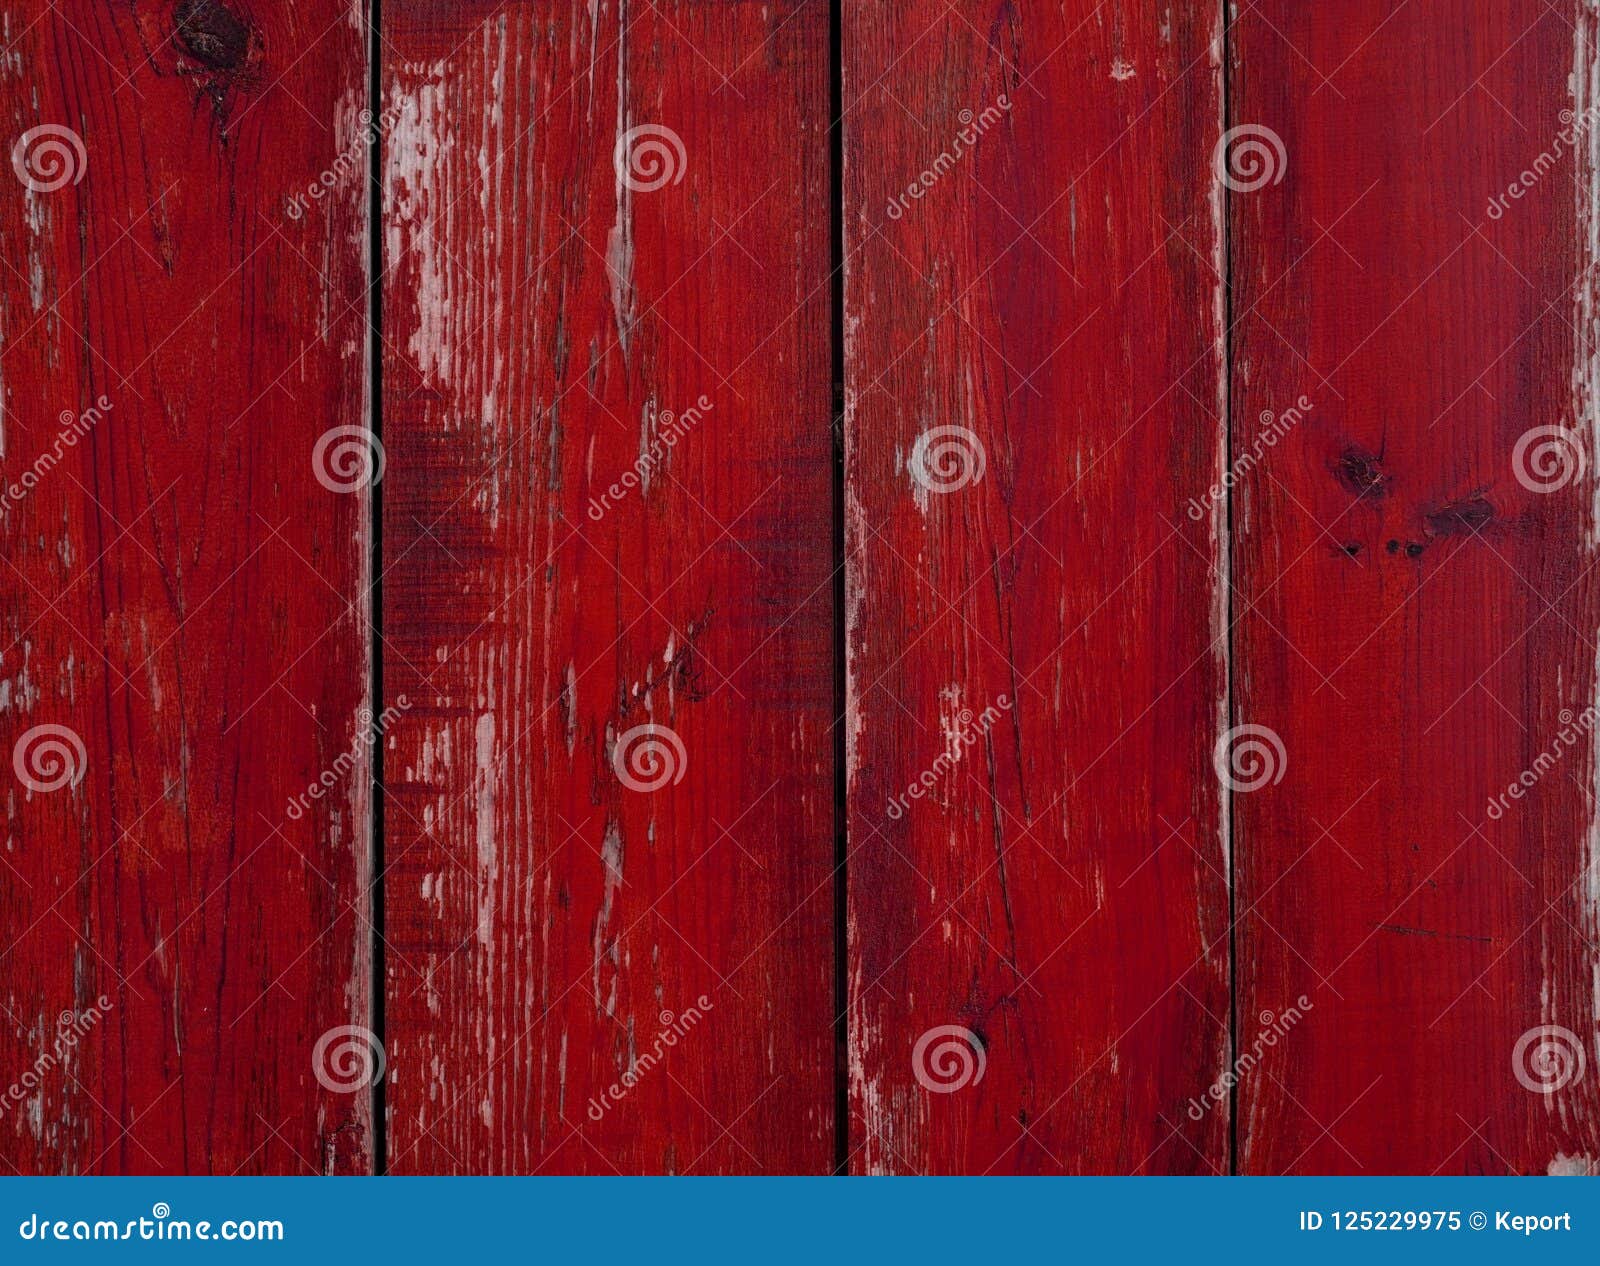 old weathered red wooden planks